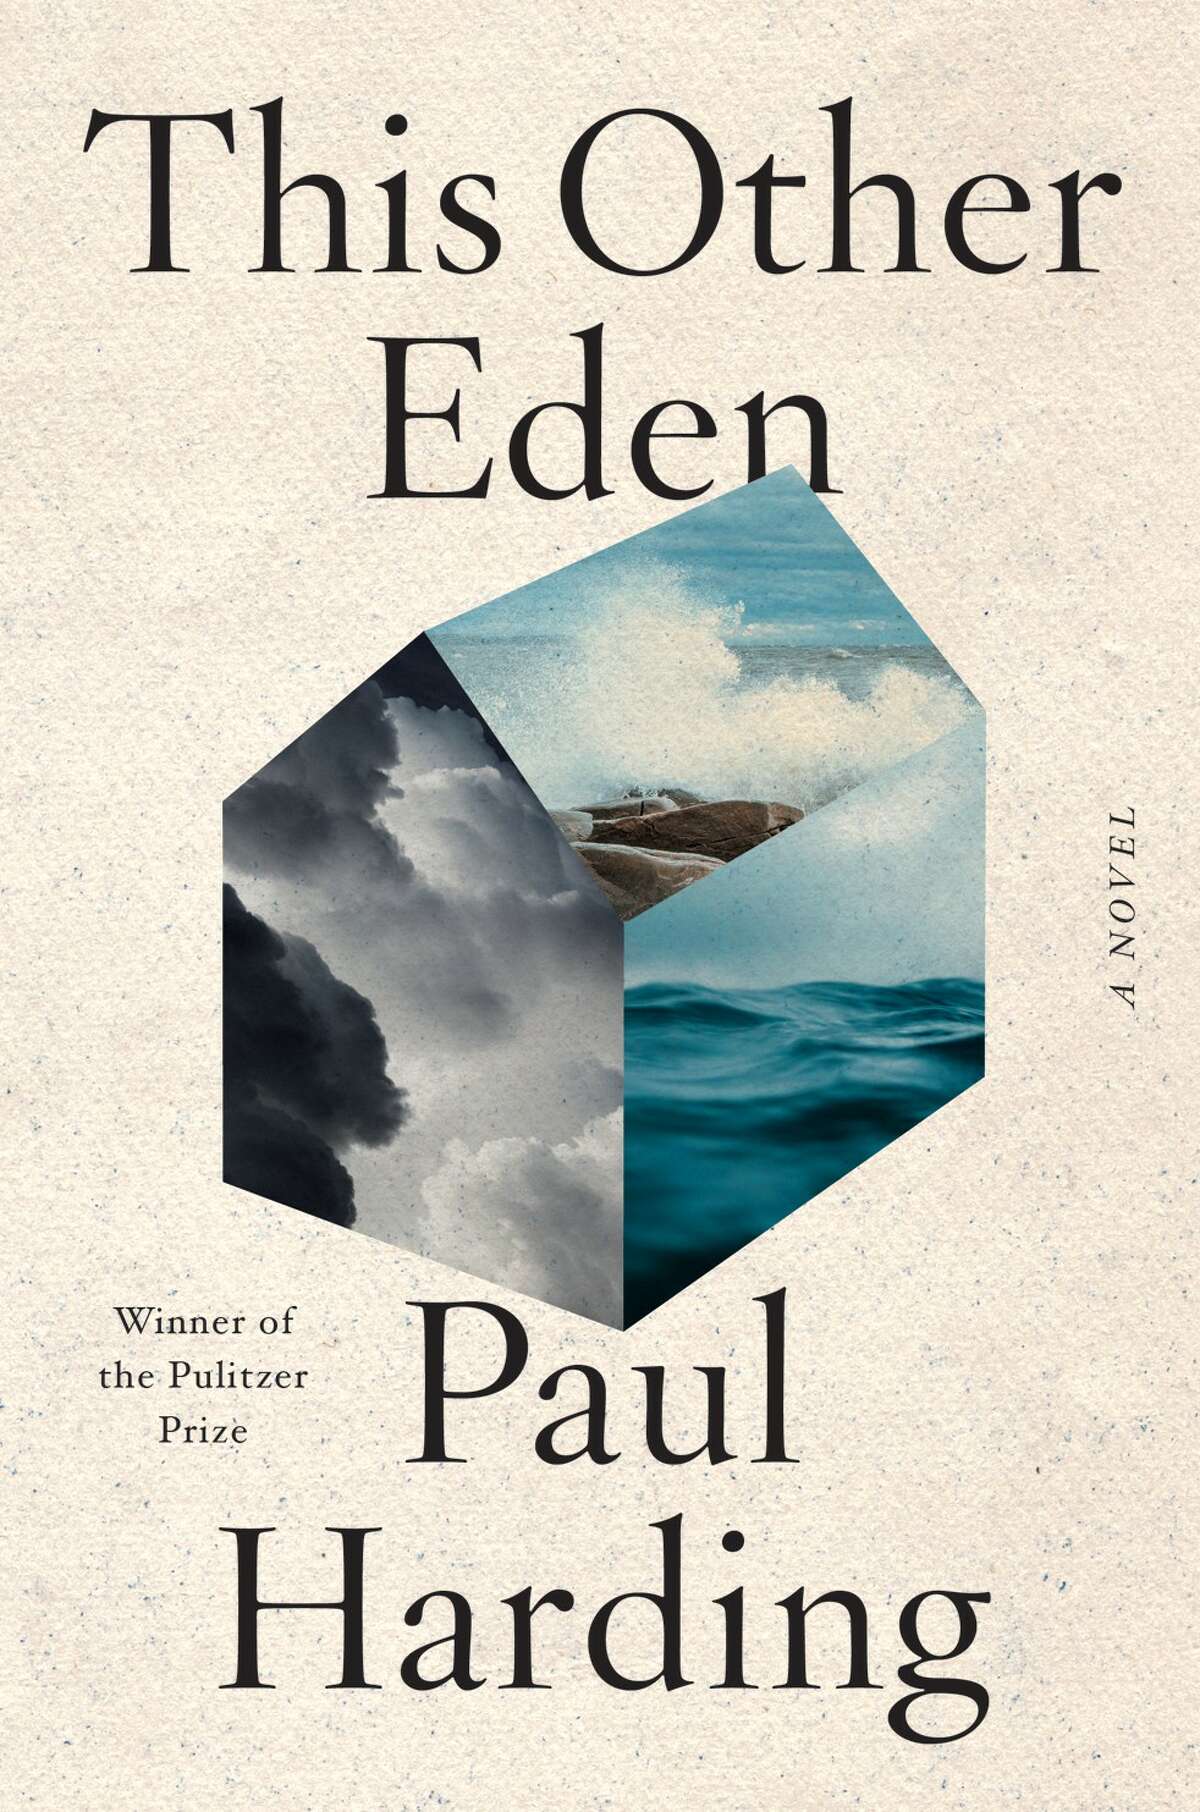 "This Other Eden" by Paul Harding